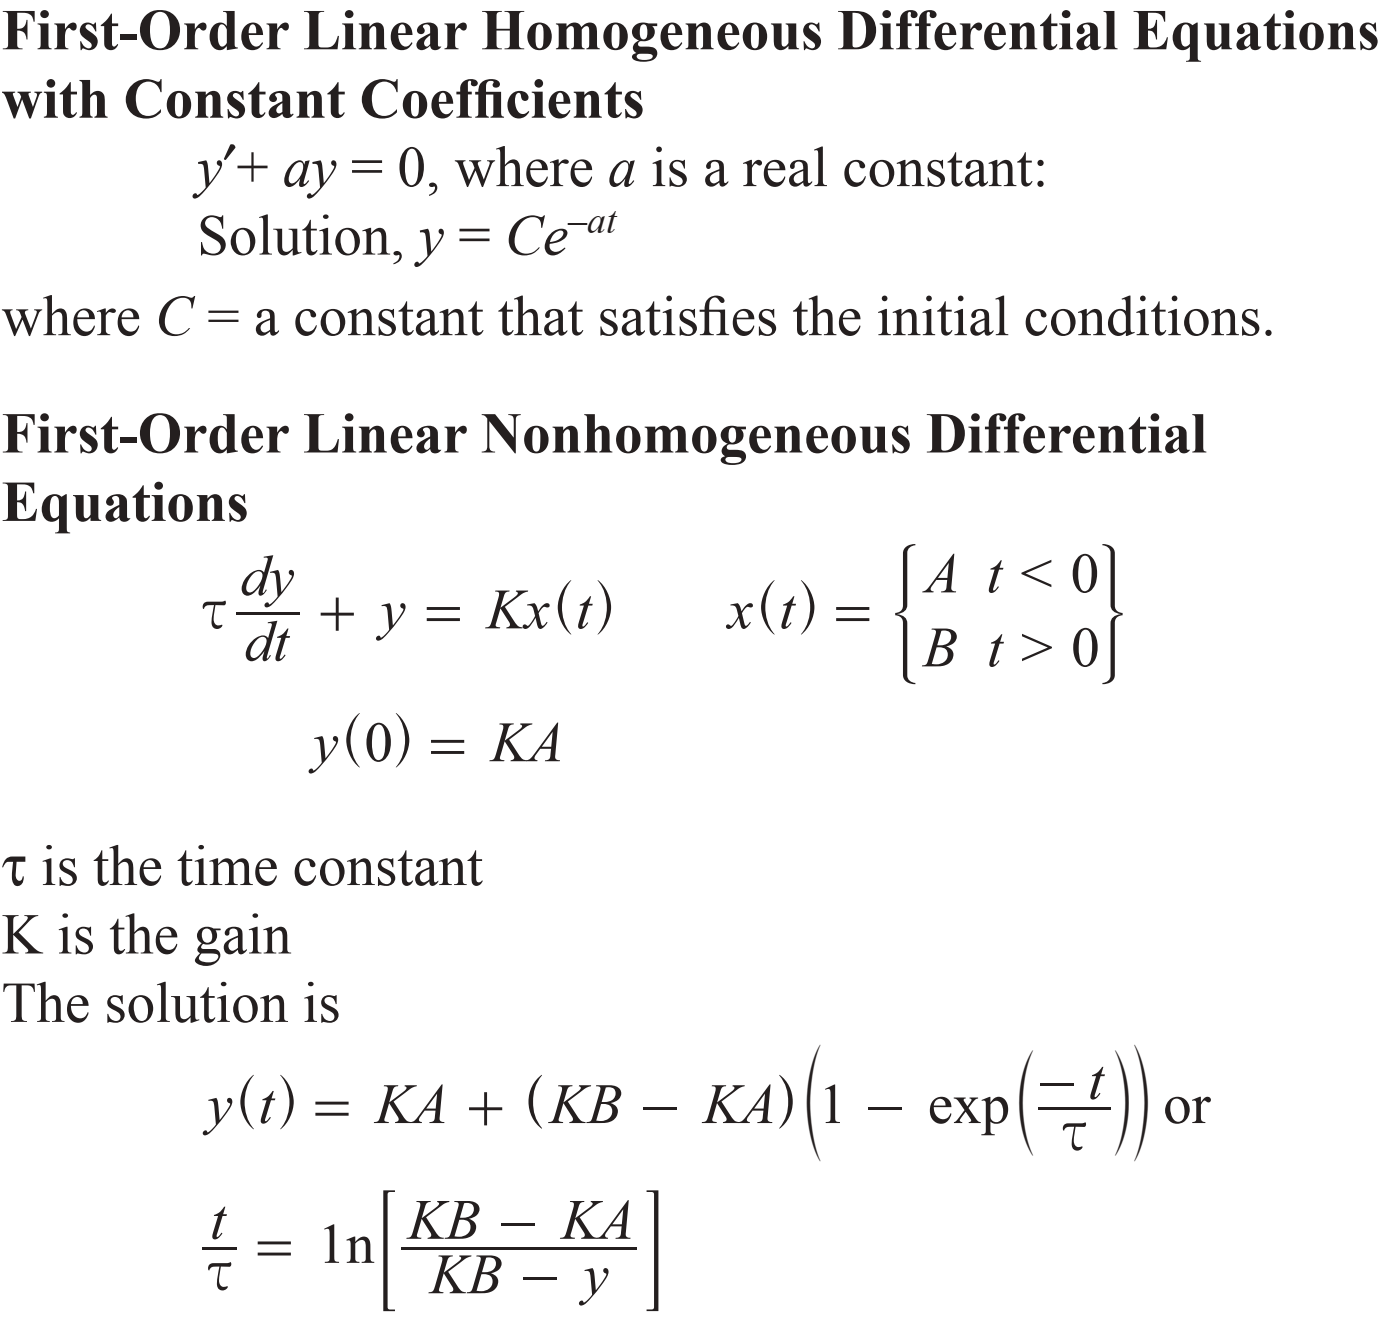 First-Order Linear Homogeneous Differential Equations
with Constant Coefficients
yay
Solution, y
a constant that satisfies the initial conditions
0, where a is a real constant:
Ce a
where C
First-Order Linear Nonhomogeneous Differential
Equations
1 < 0l
dy
x(t) =
+ y = Kr(t)
|B t> of
dt
y(0) KA
t is the time constant
K is the gain
The solution is
KA (KB KA)1 - exp
t
or
y(t) =
In
КА
КВ
t
КВ
